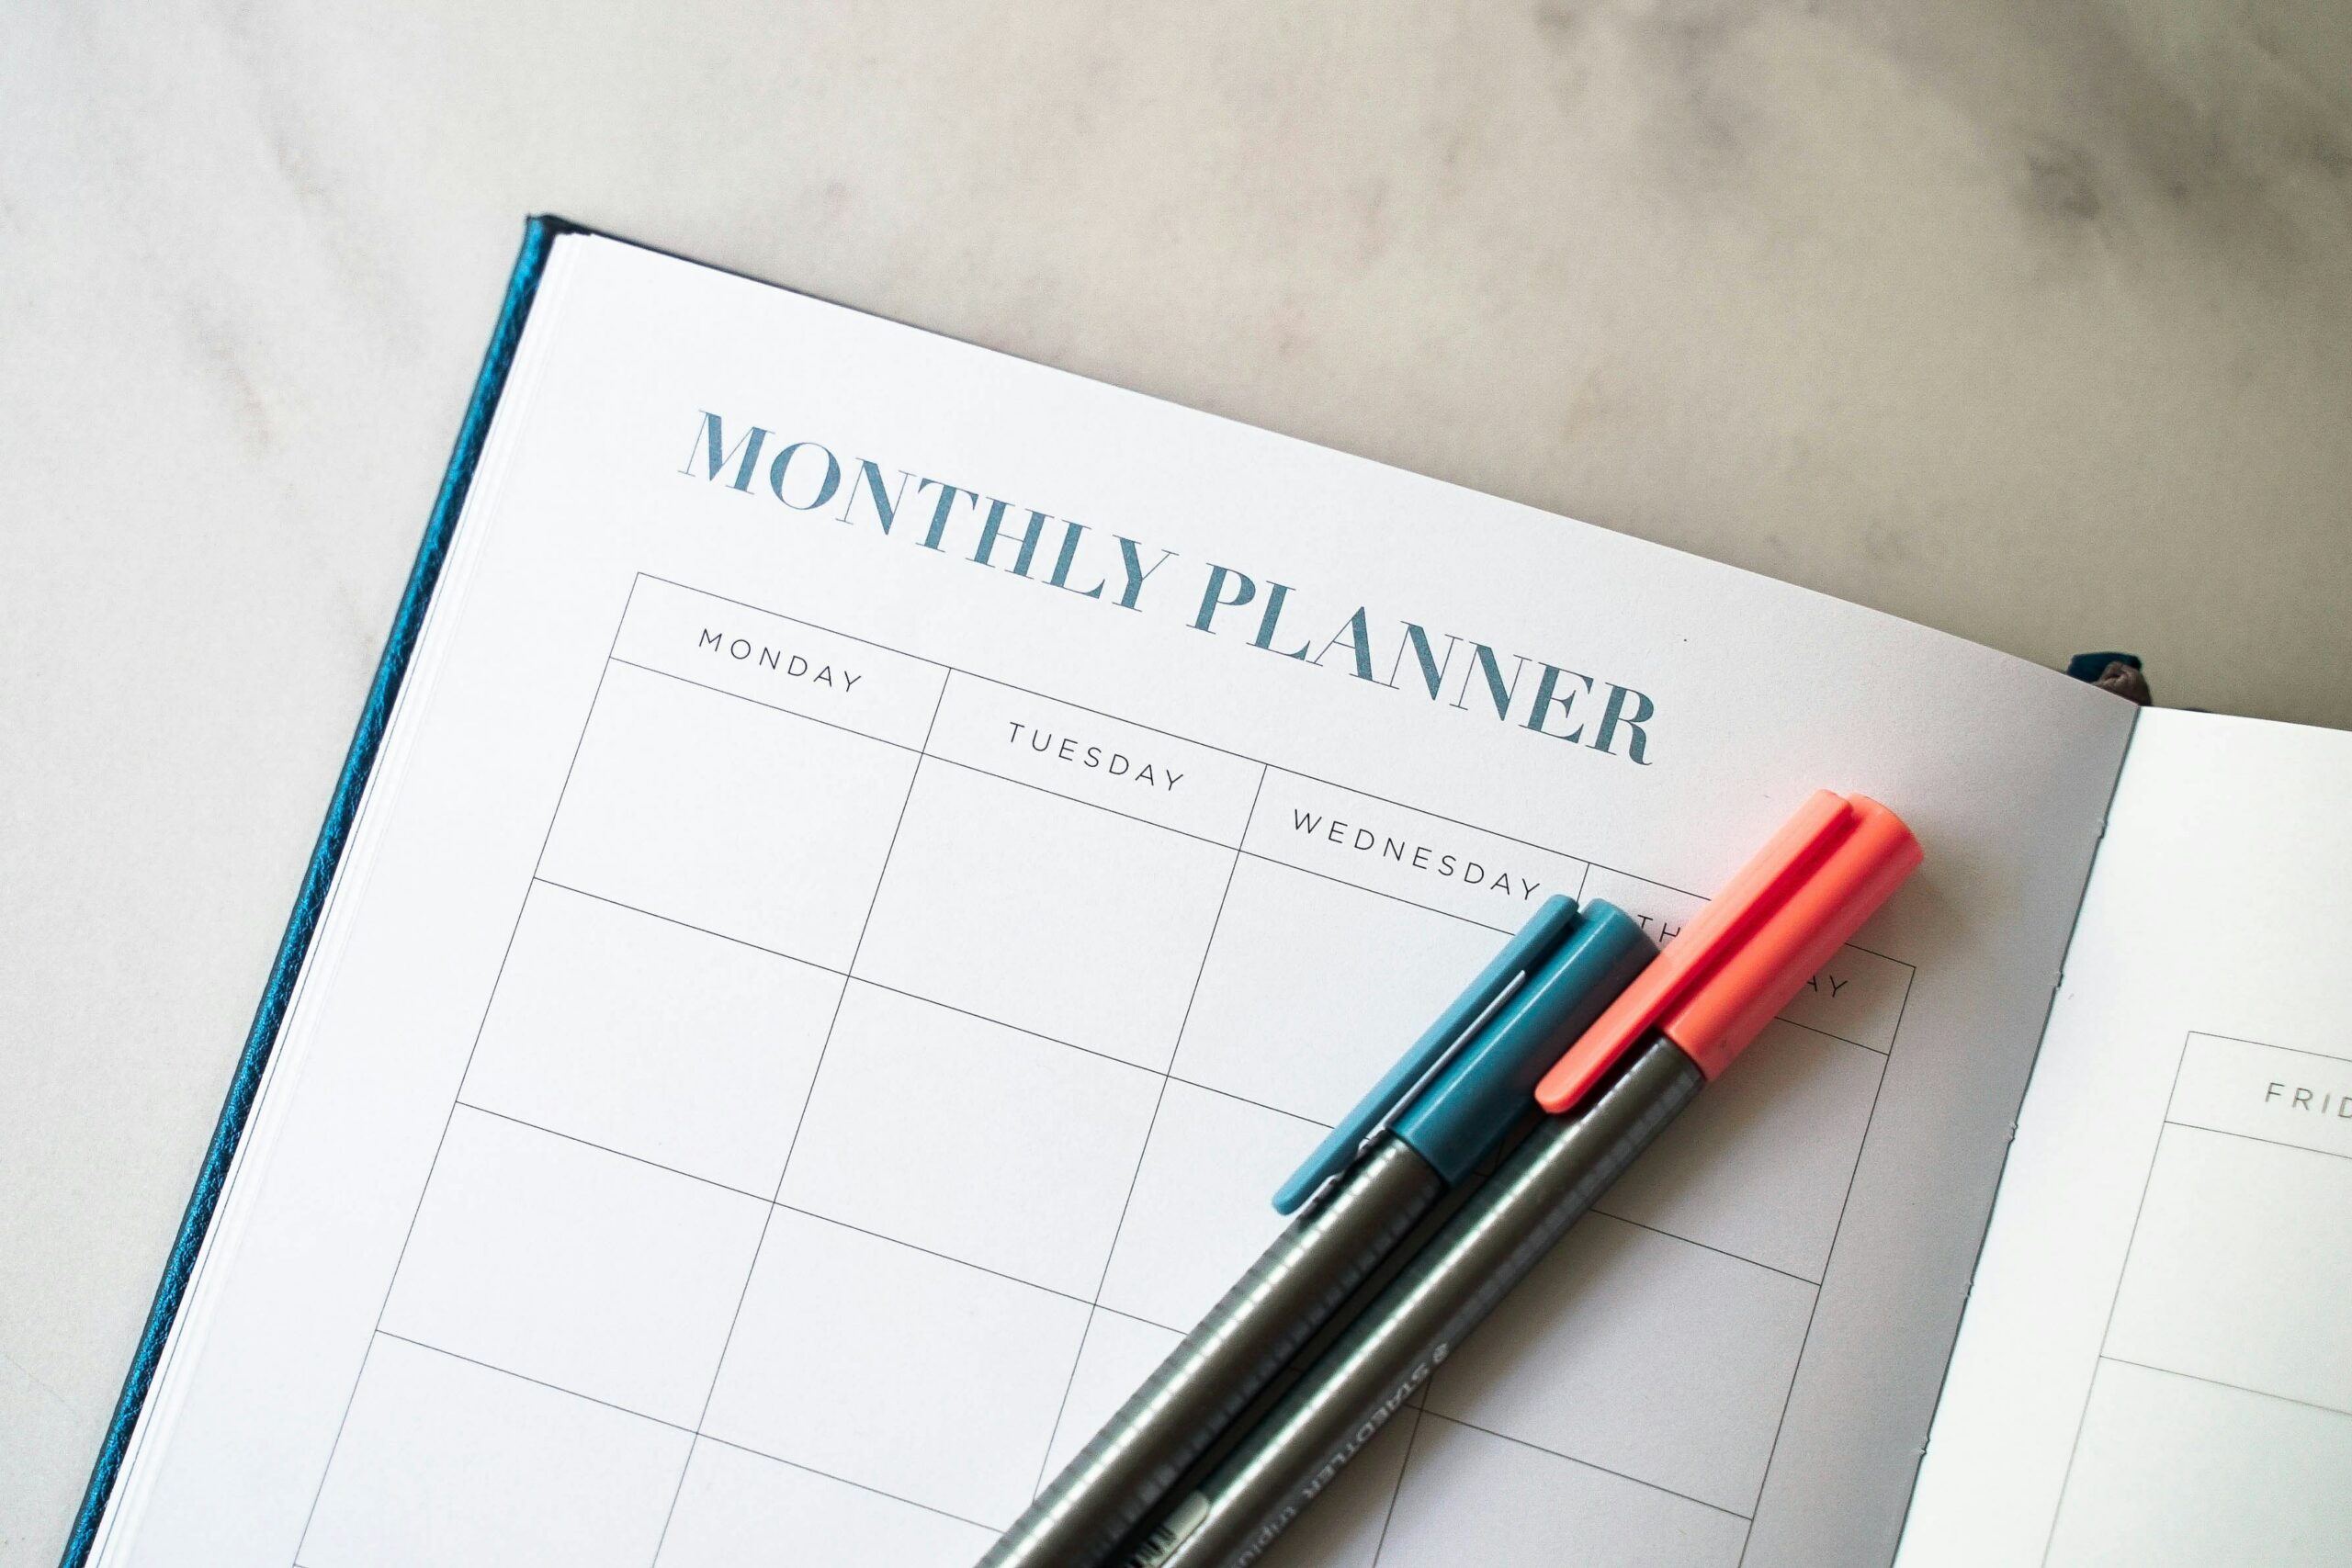 Image of a monthly planner - Destination Certification